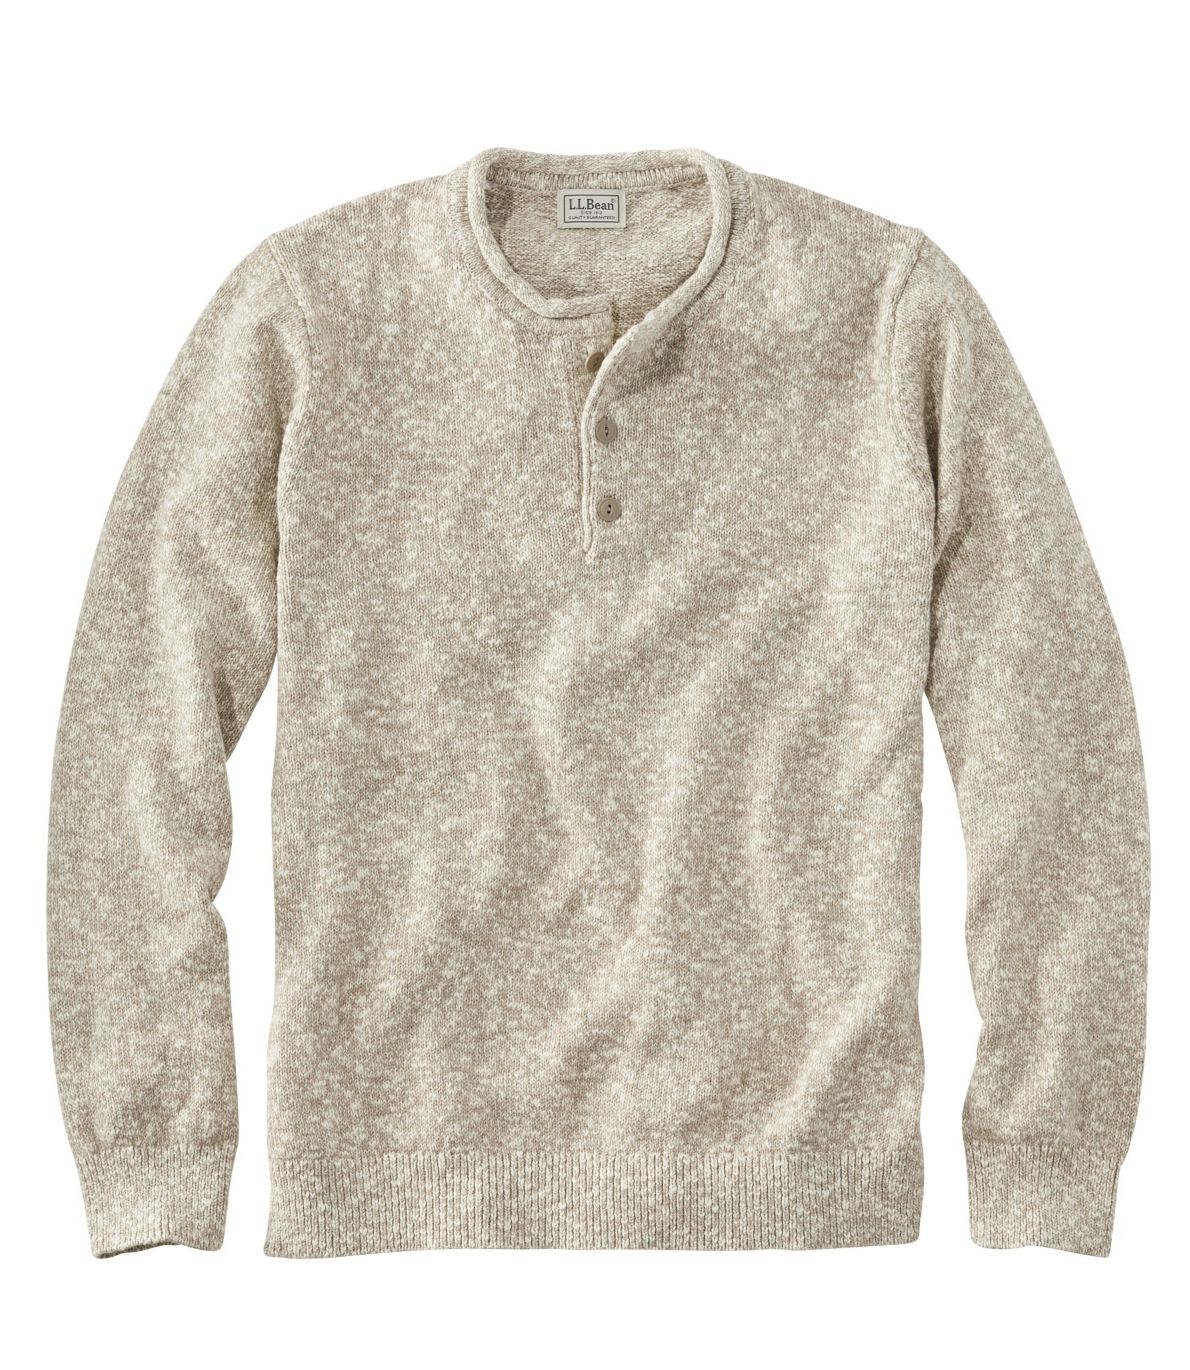 Cotton Ragg Sweater, Rollneck Henley, Slightly Fitted